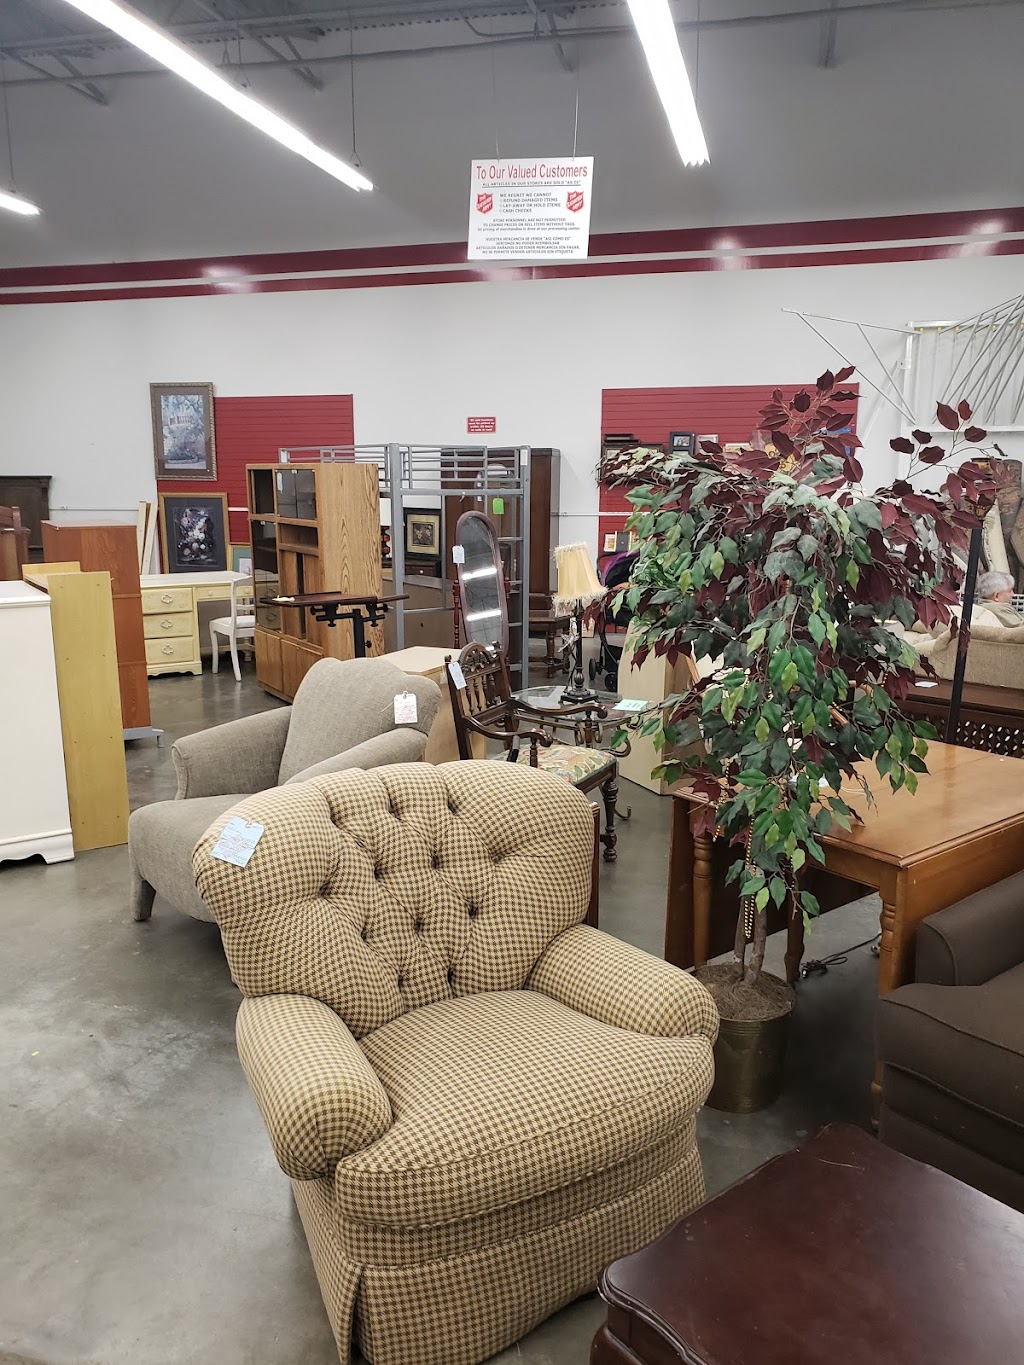 The Salvation Army Family Store & Donation Center | 8145 S Texas 6, Houston, TX 77083 | Phone: (281) 530-1007